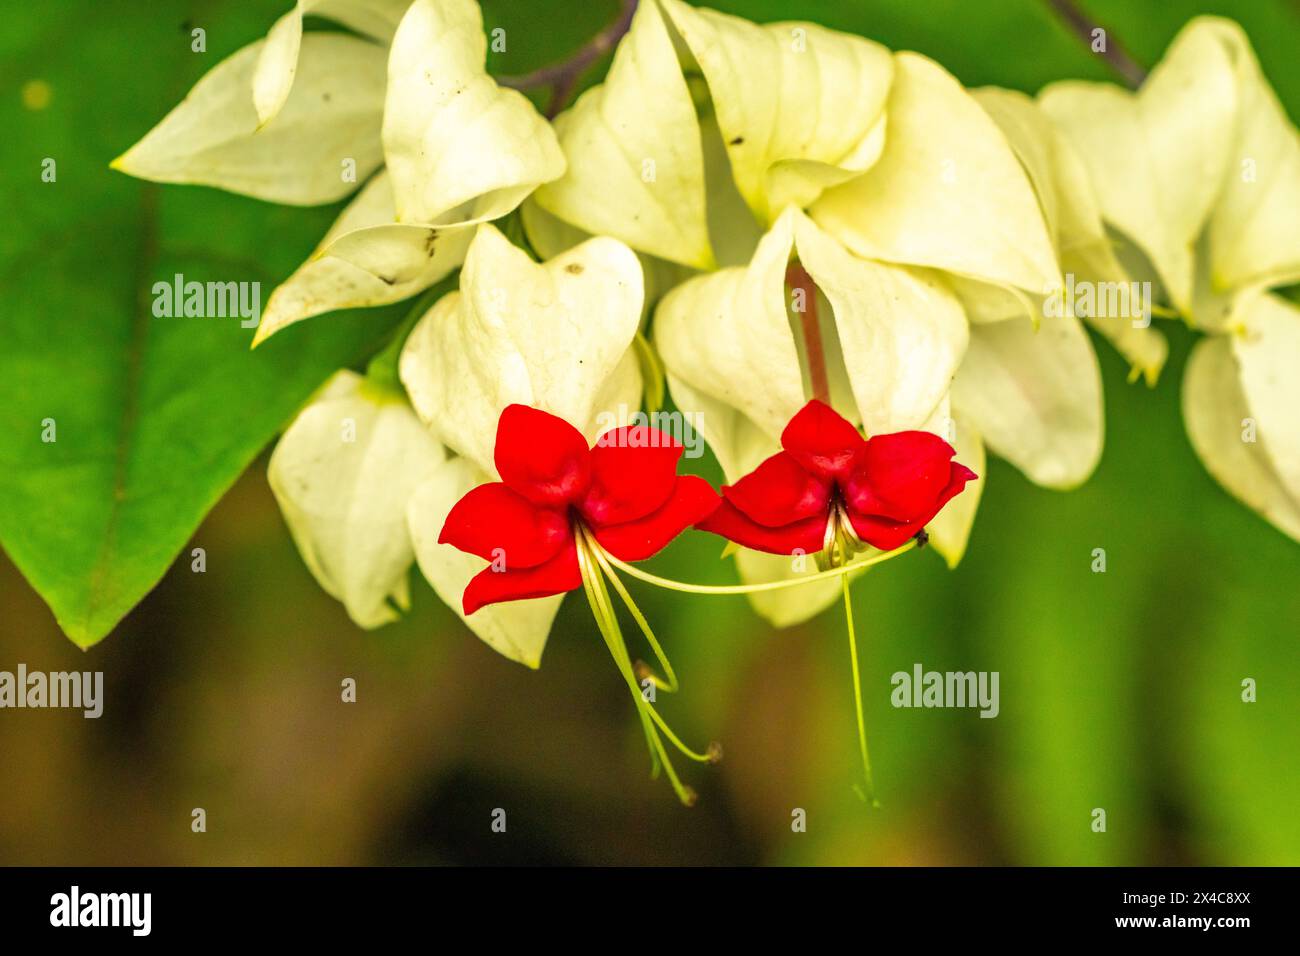 Costa Rica, San Jose. Close-up of red and white flowers. Stock Photo